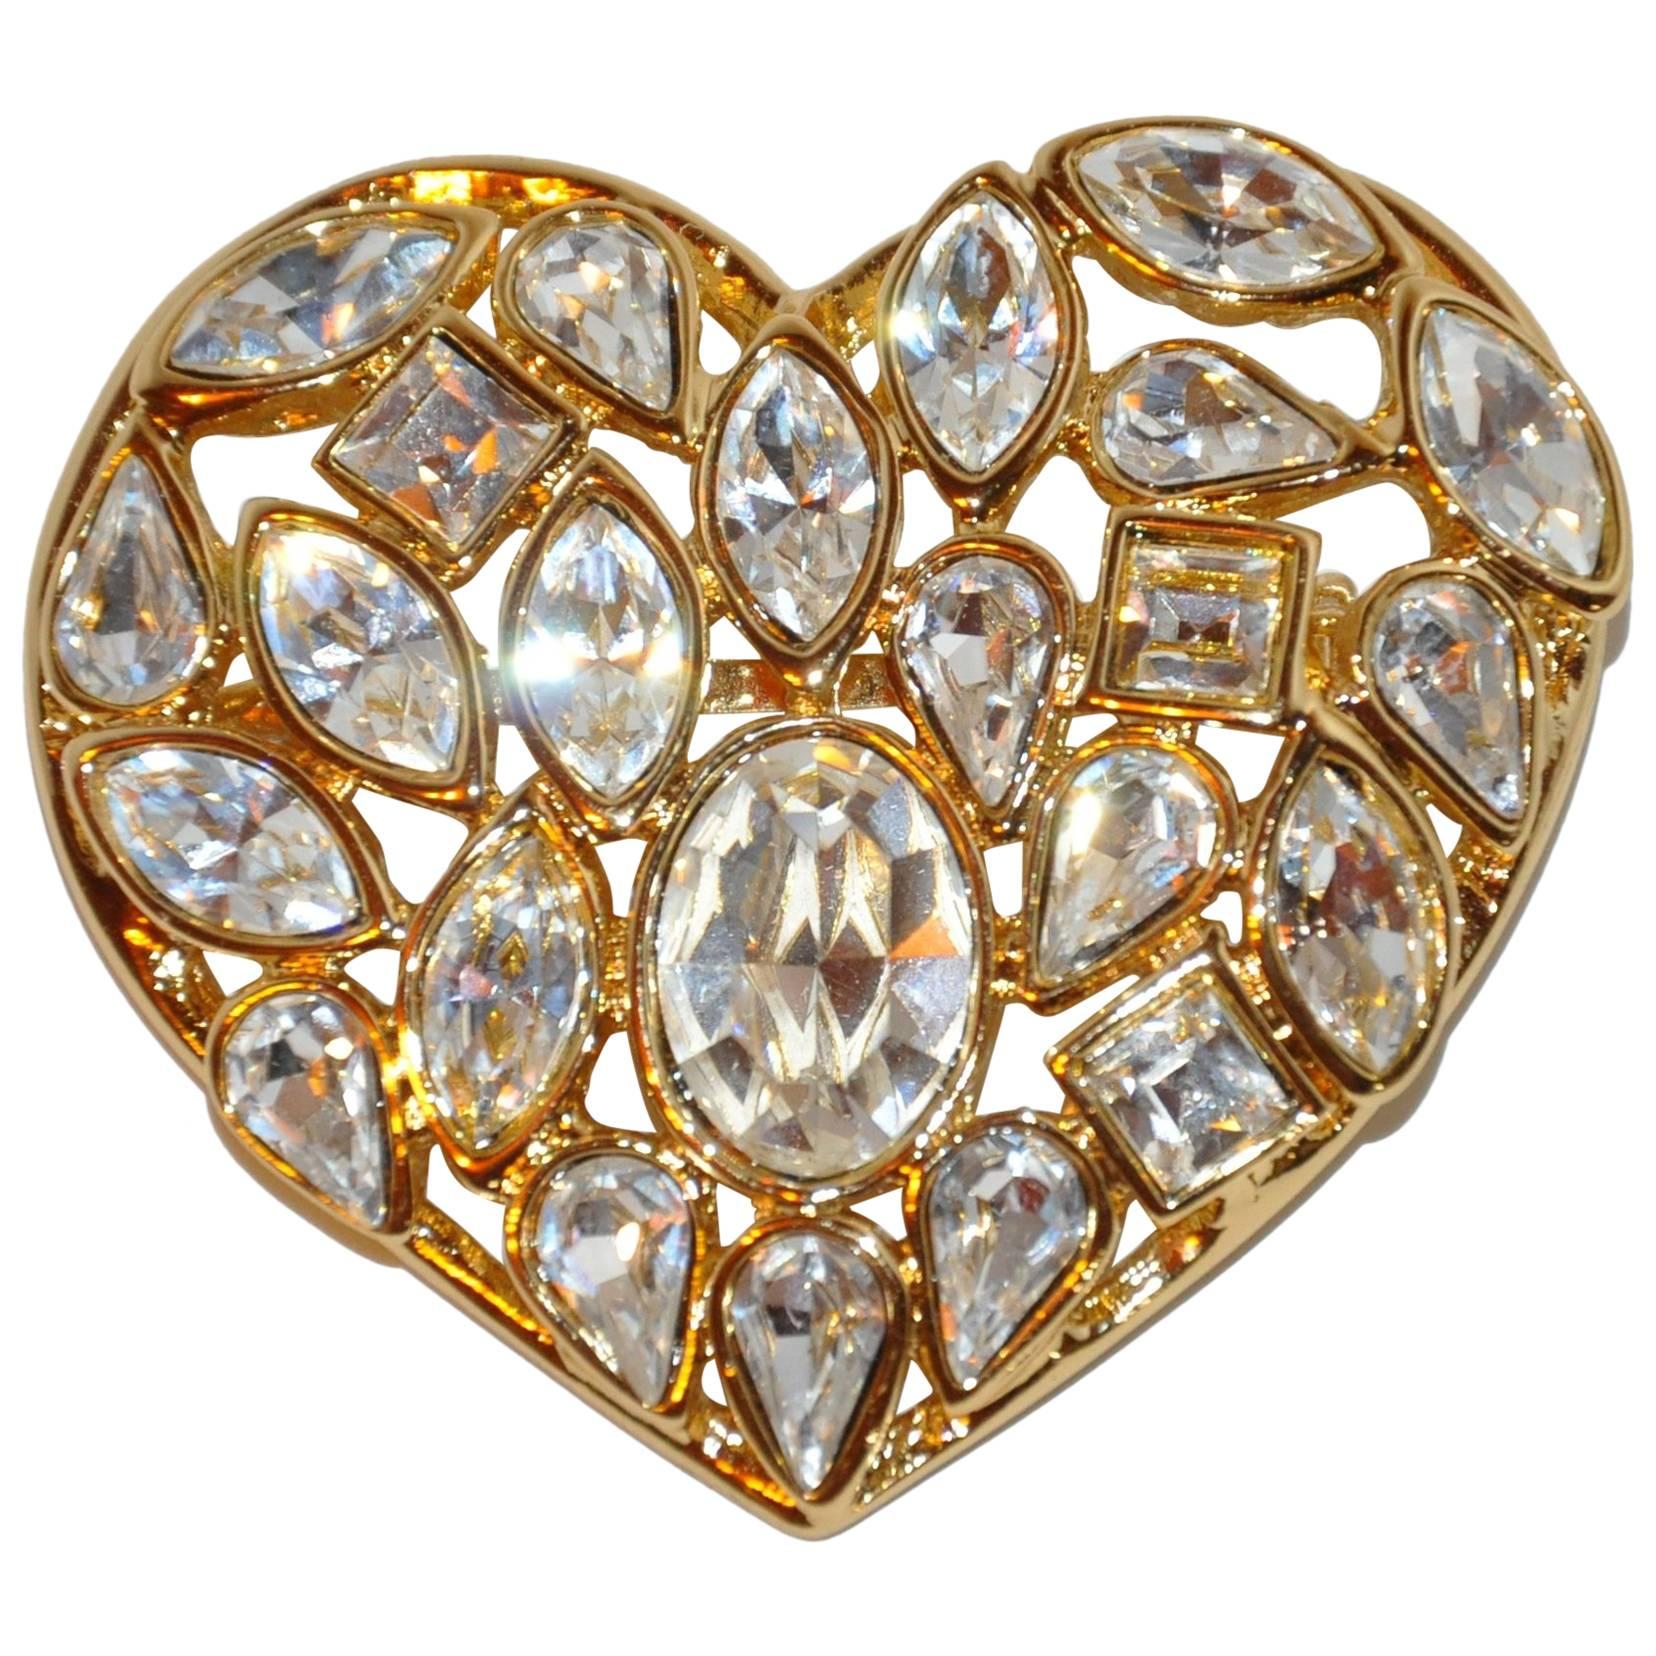 Yves Saint Laurent "Hearts to Hearts" Riesige Multi-Strass-Brosche